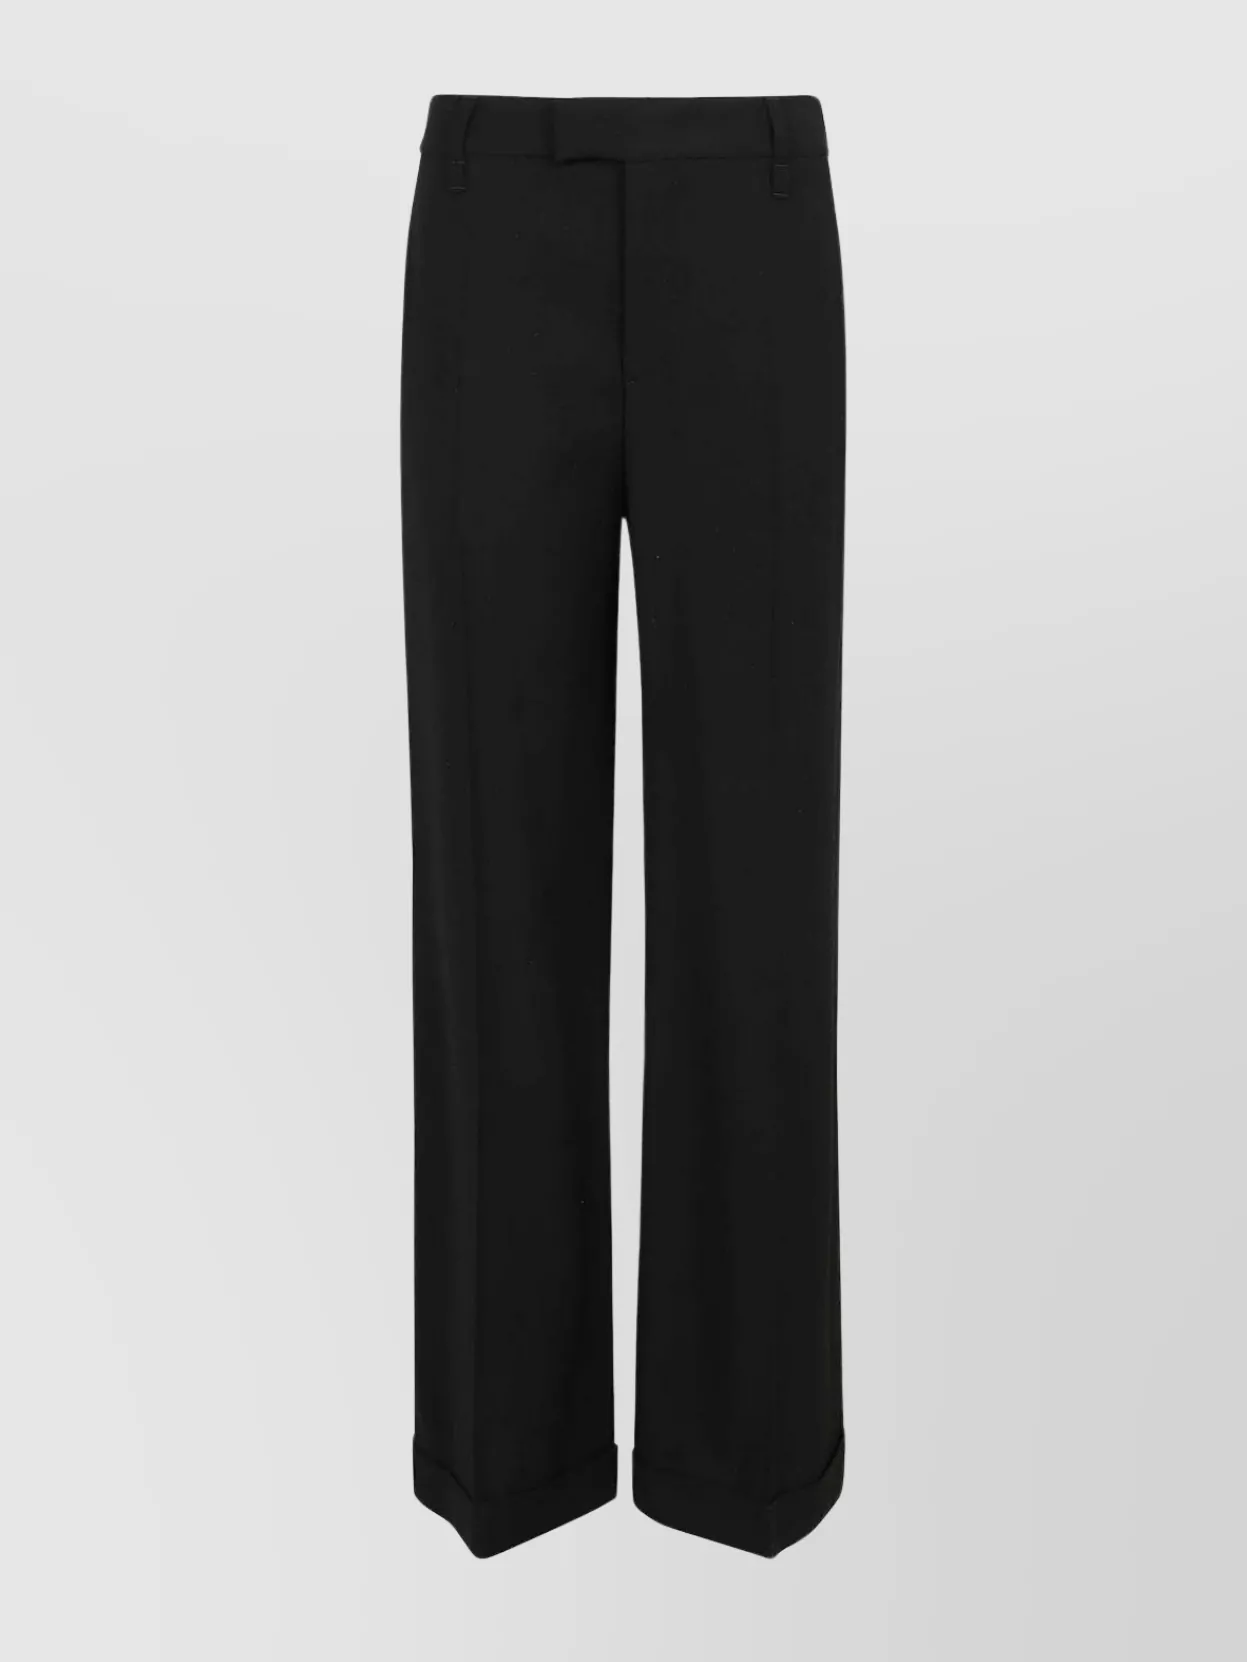 Shop Brunello Cucinelli Lady Trousers Featuring Belt Loops